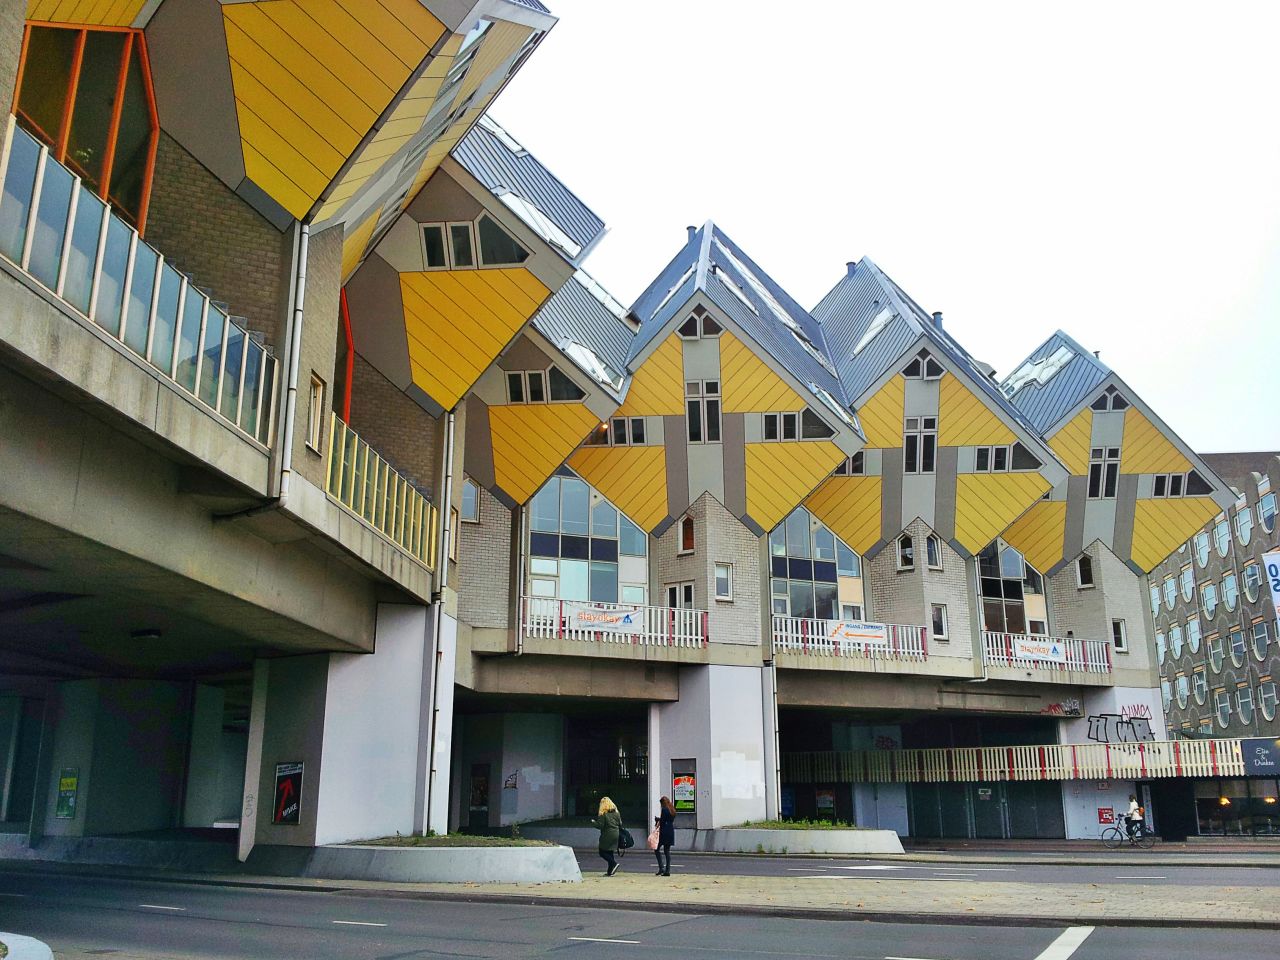 The Cube Houses in Rotterdam and Helmond in the Netherlands were designed to open up space on the floor by creating living spaces up on the roof. <a href="http://ireport.cnn.com/docs/DOC-1125497">Thai Dang </a>was intrigued to learn that people live inside these geometric homes.